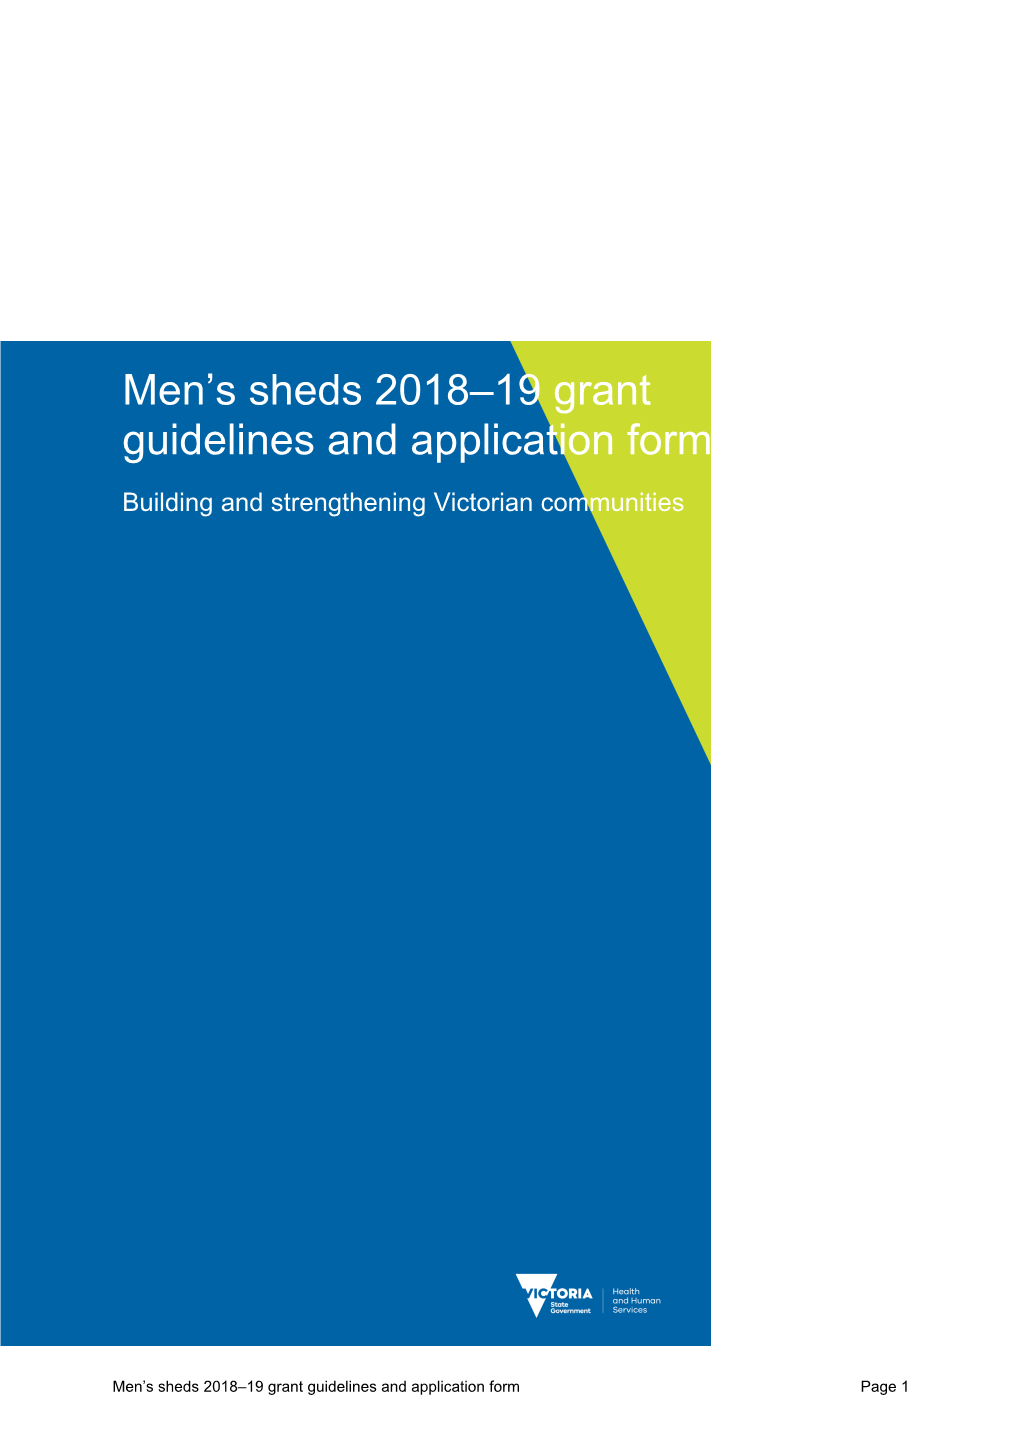 Men S Sheds 2018 19 Grant Guidelines and Application Form